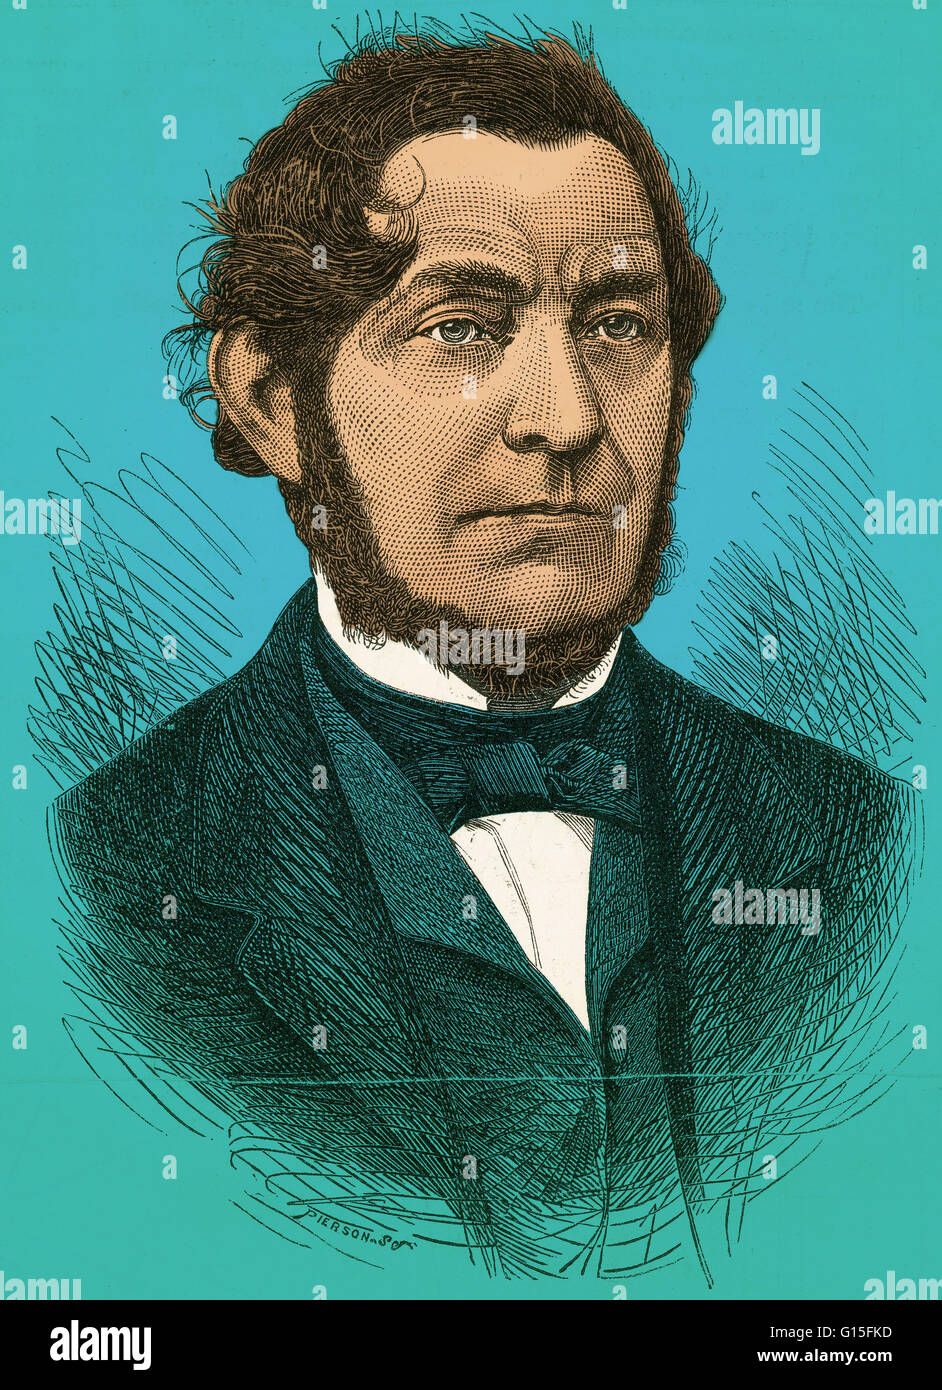 An illustration of Robert Bunsen (March 31, 1811 - August 16, 1899), the German chemist who perfected the burner that was invented by Michael Faraday and worked on emission spectroscopy of heated elements. He discovered the elements cesium and rubidium wi Stock Photo